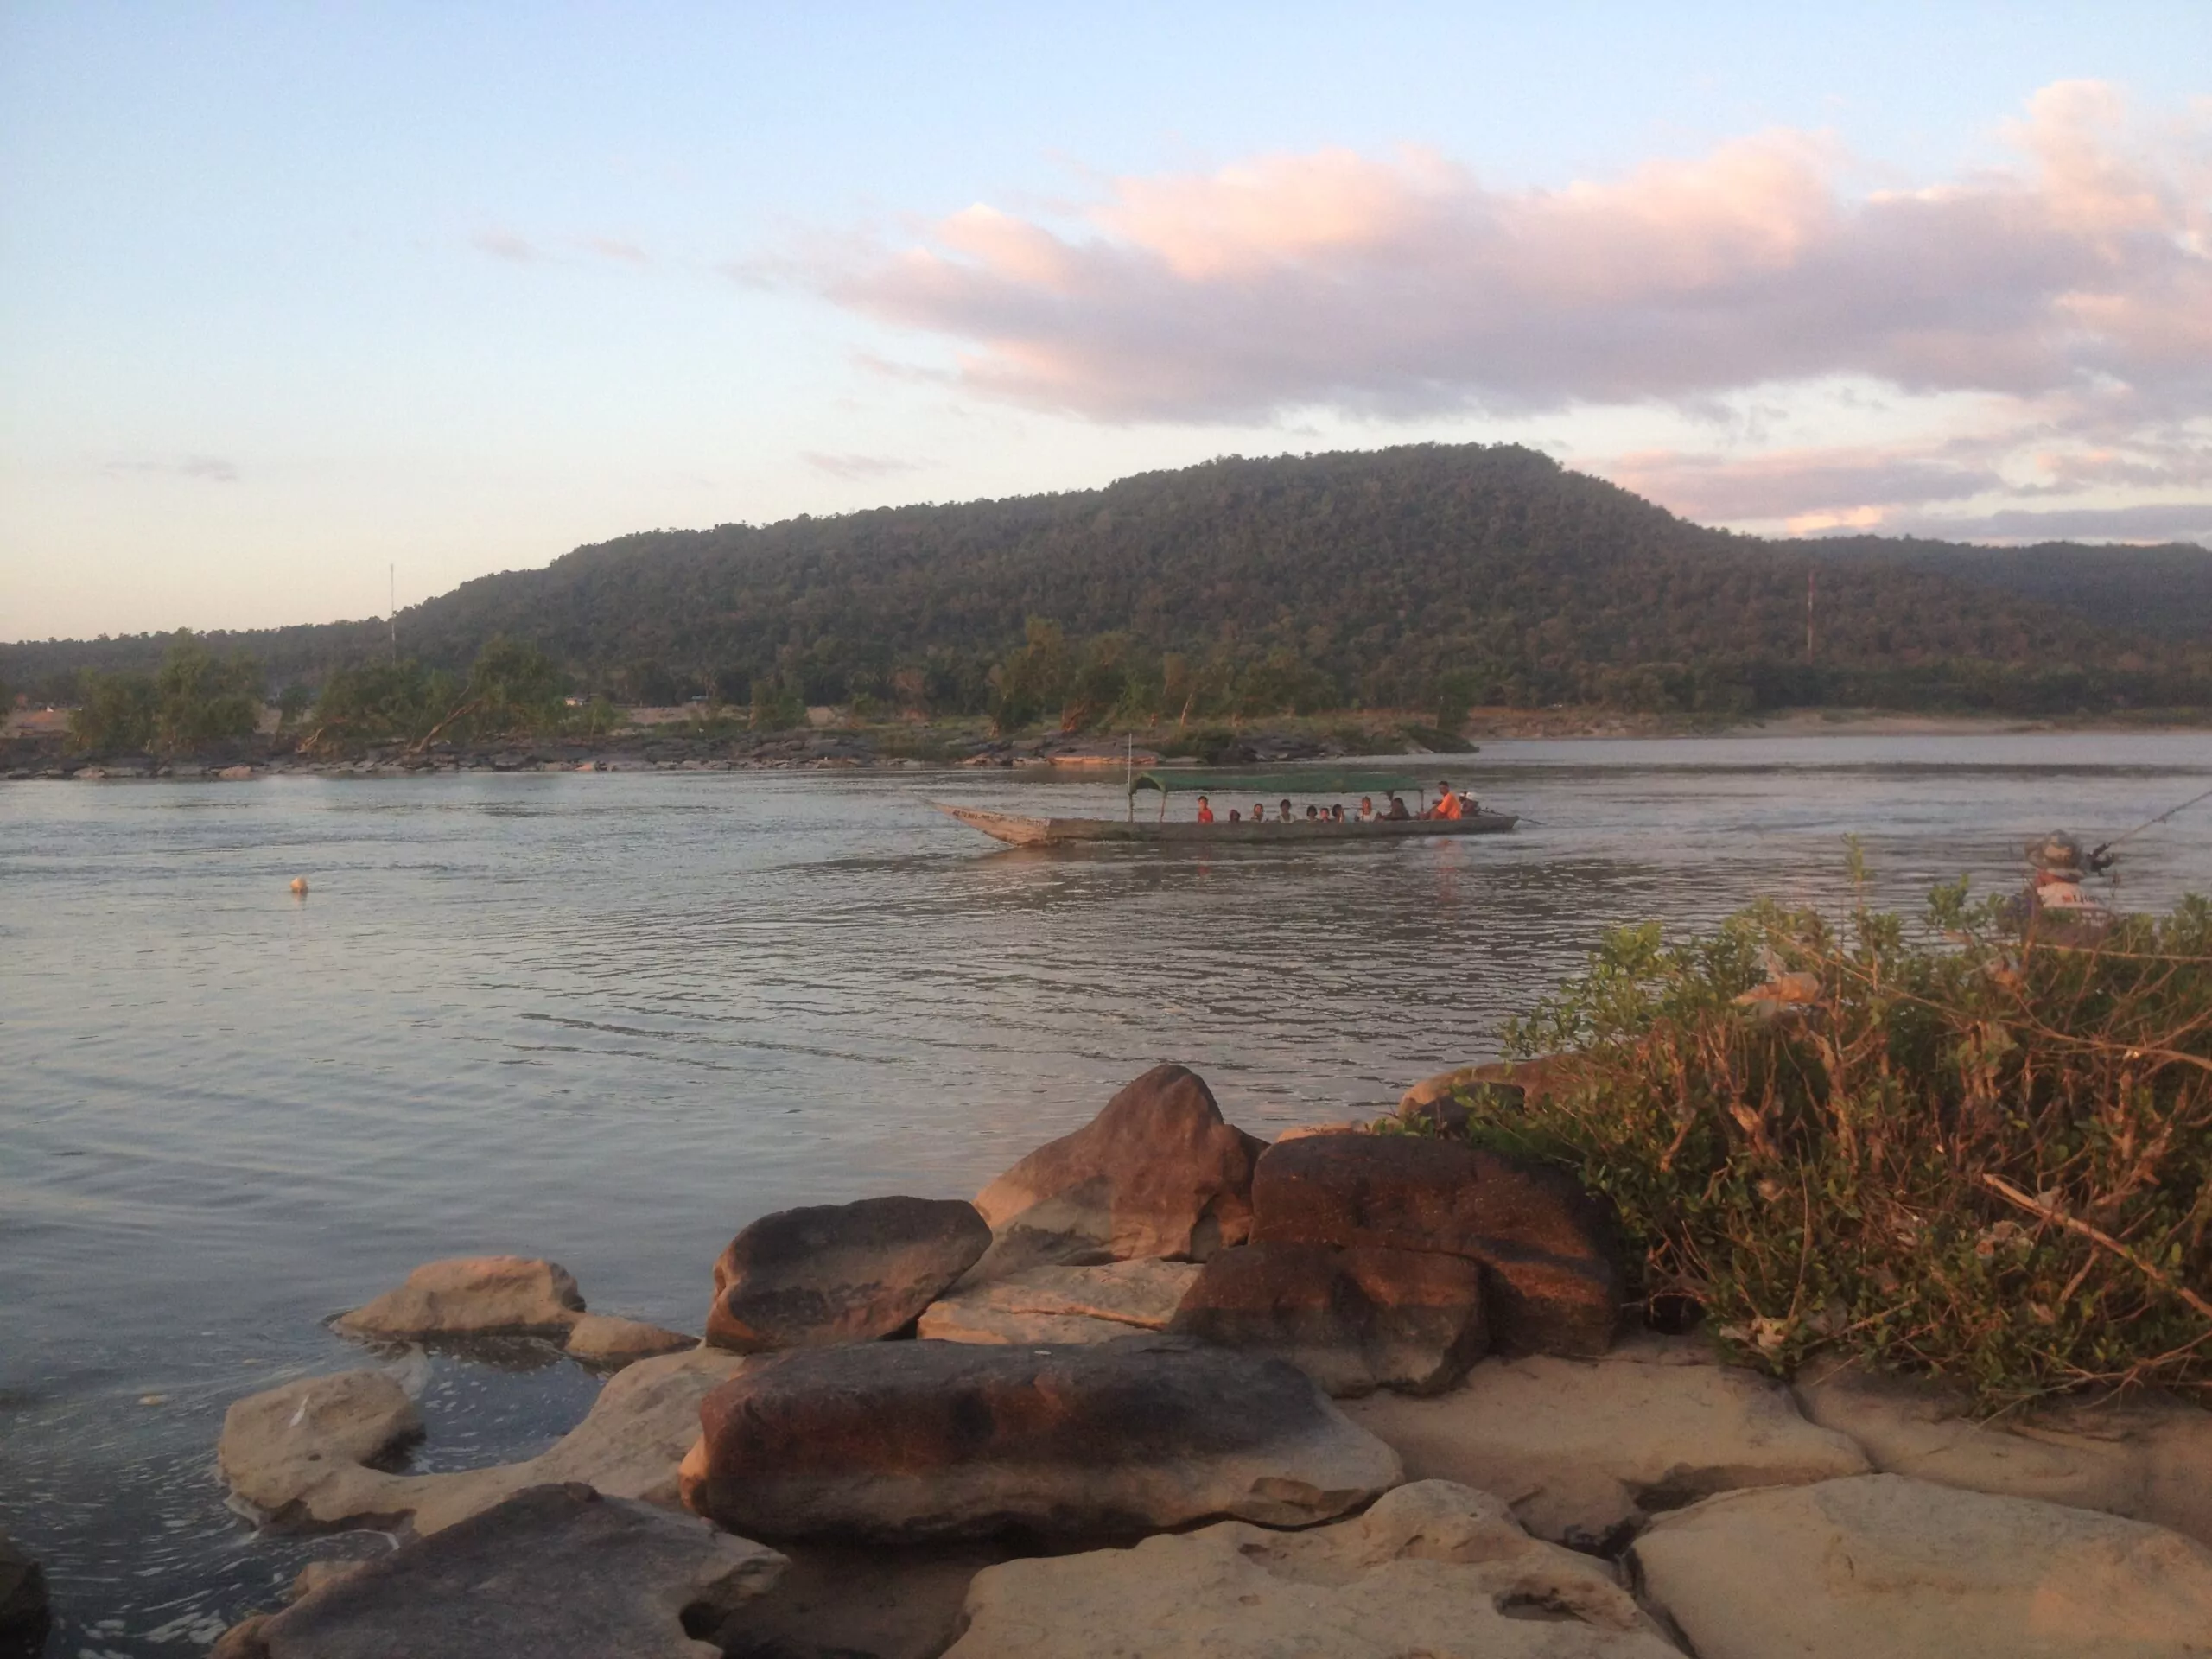  sun set at the confluence of the chocolate-brown Mekong and the deep blue Mun rivers